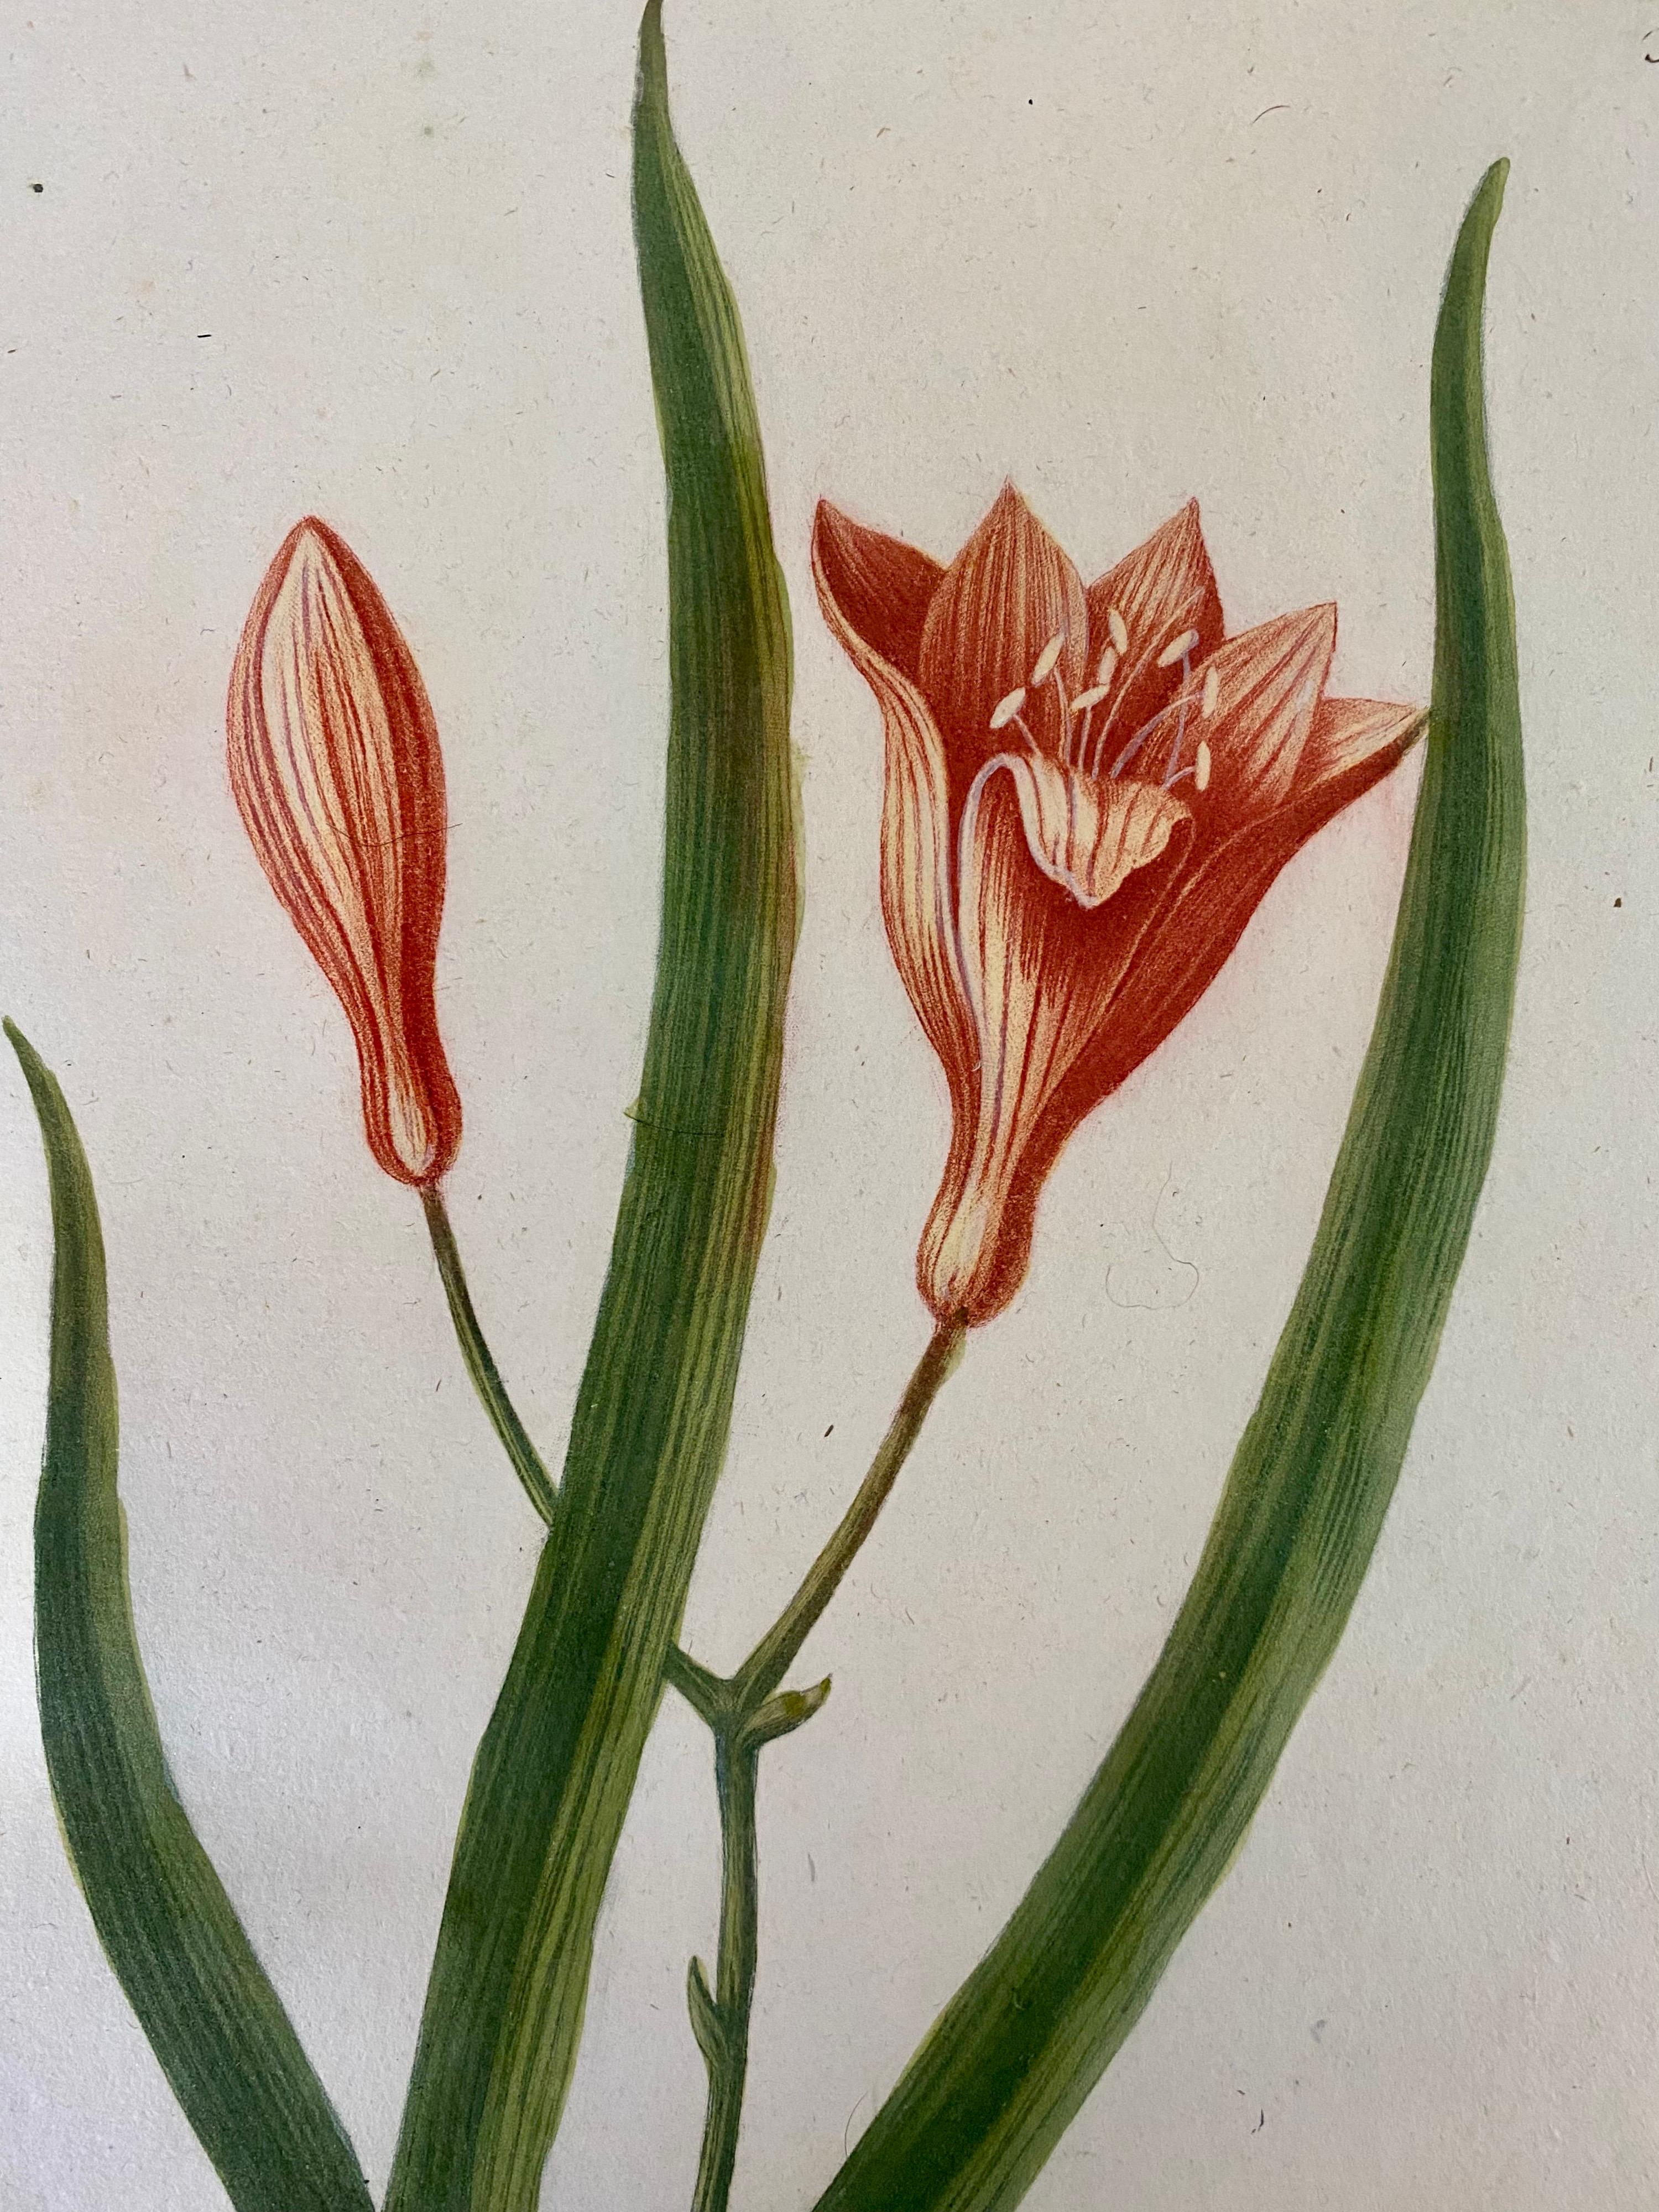 This rare original hand coloured engraved botanical by Johann Weinmann , date back to 1739 and is framed in bespoke champagne gold frame with hessian mount that work great with the nature of the picture. Can be purchased individually or as a larger